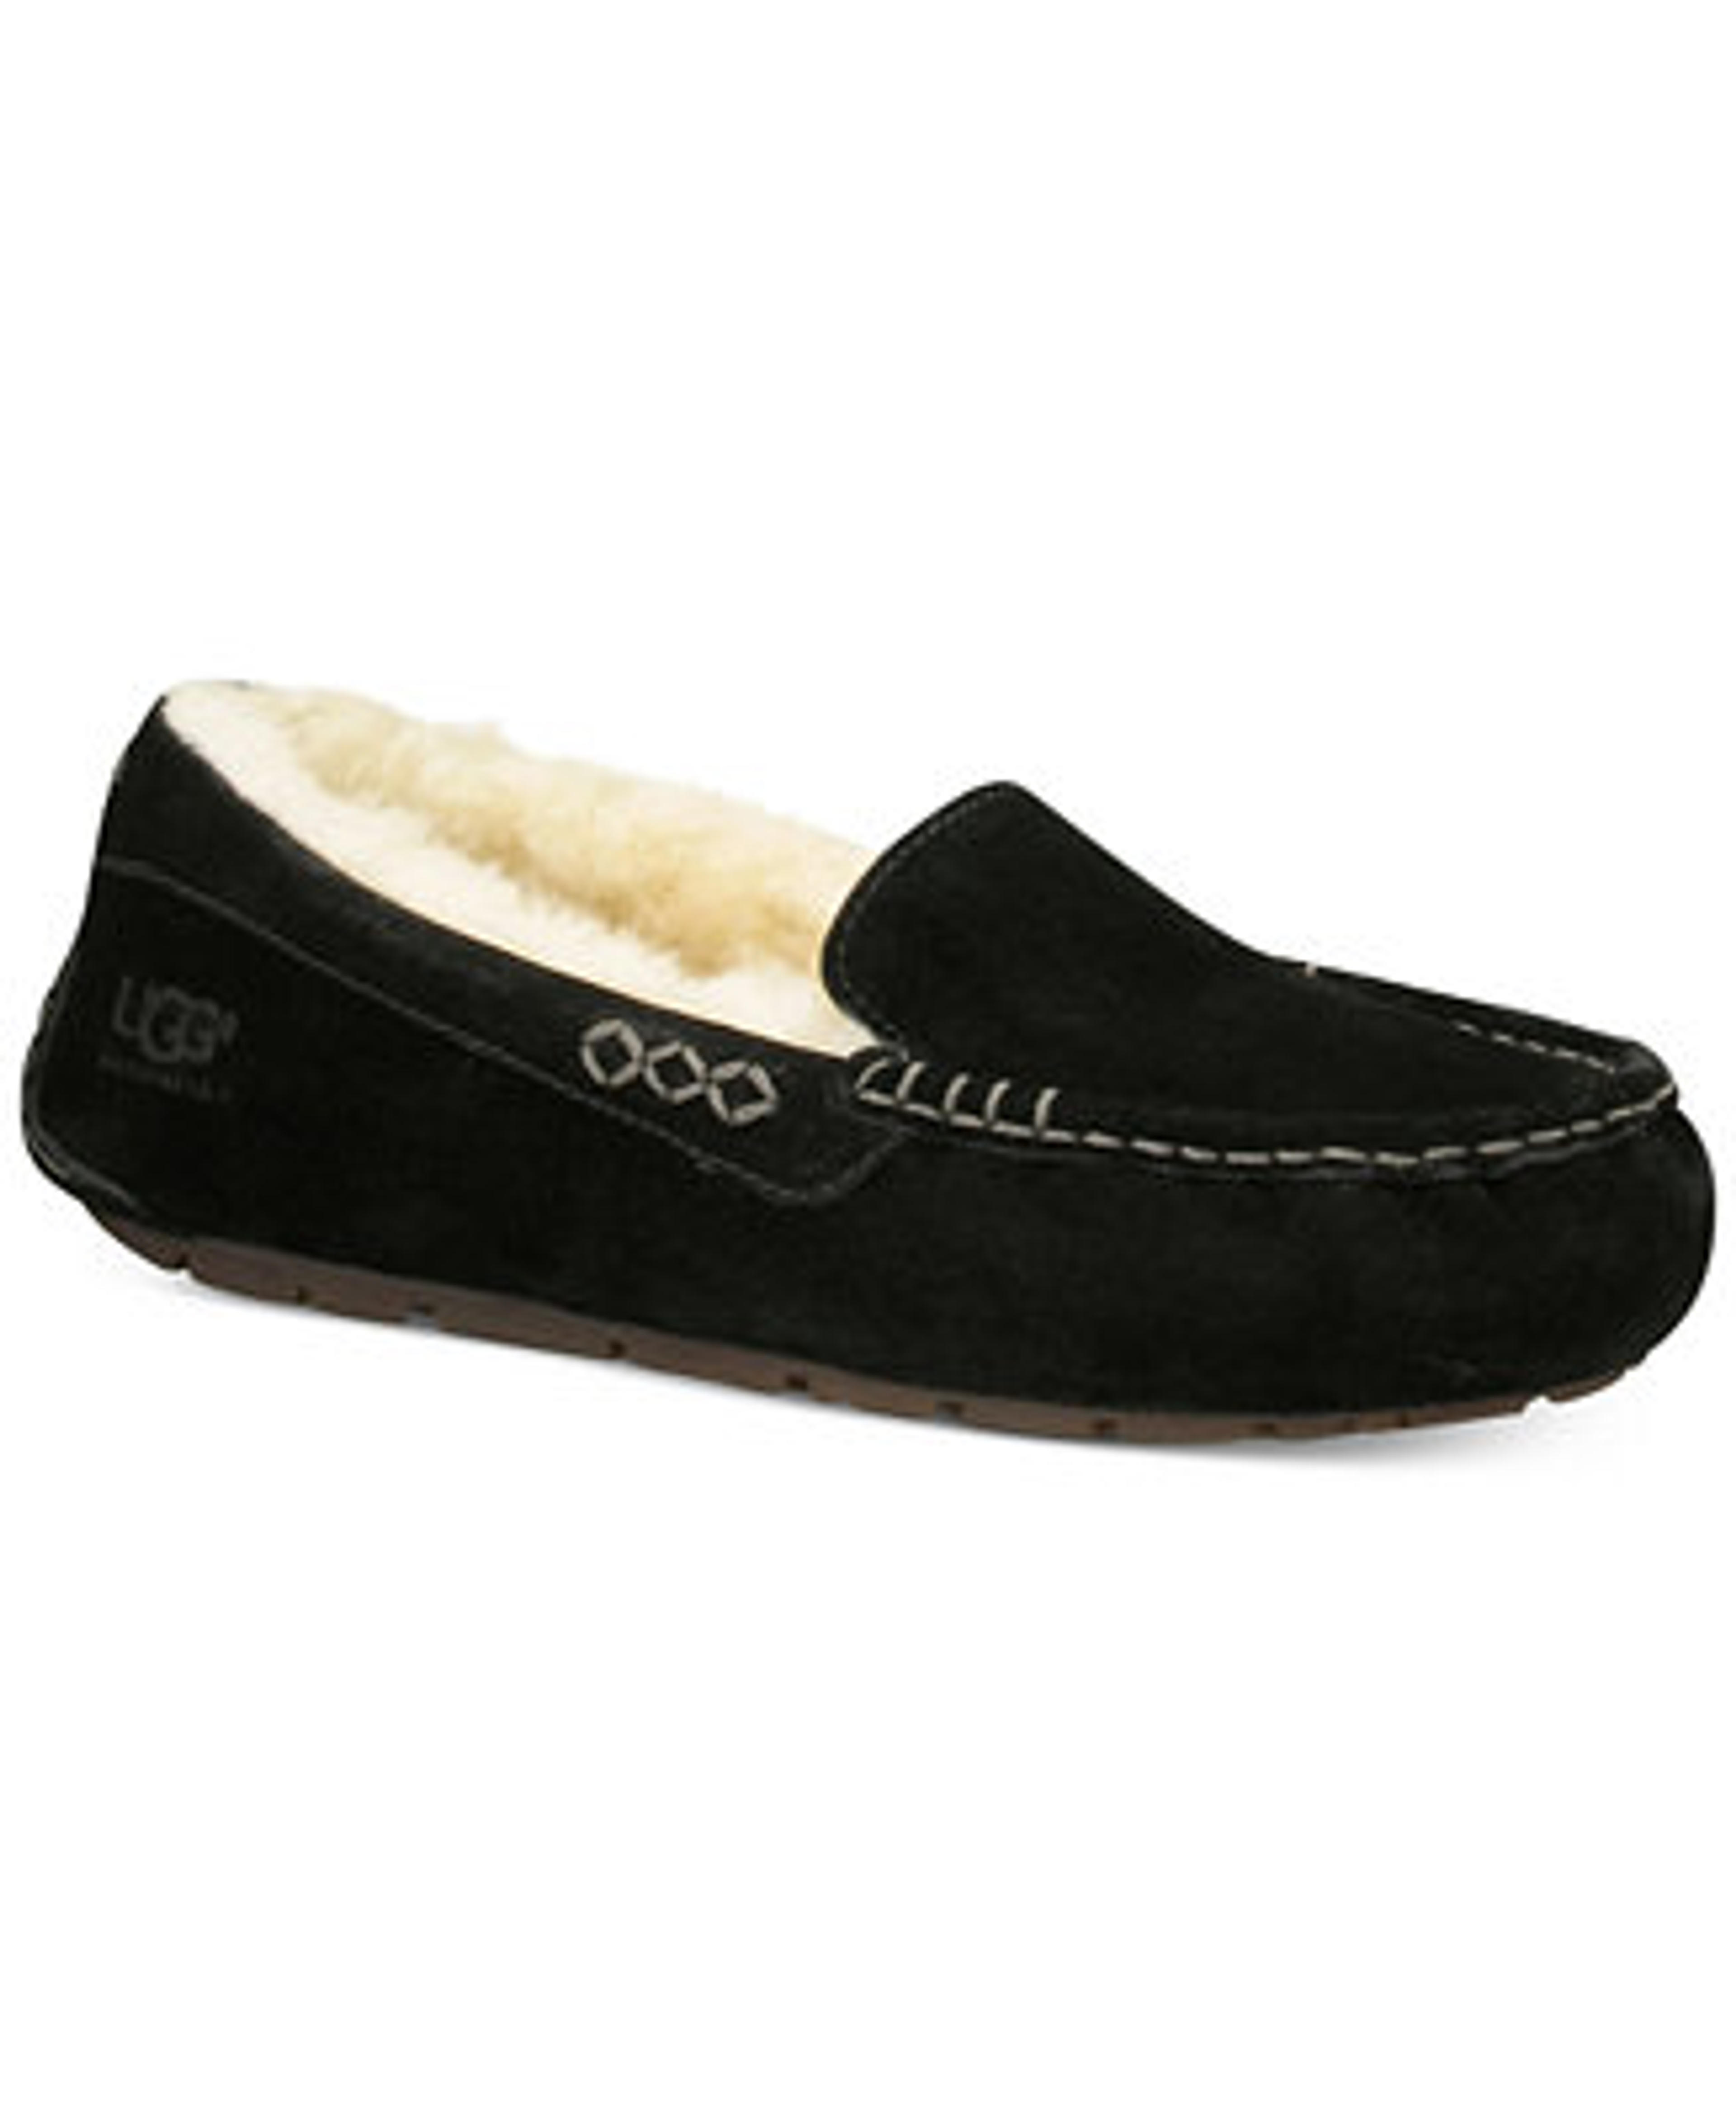 UGG® Women's Ansley Moccasin Slippers & Reviews - Slippers - Shoes - Macy's